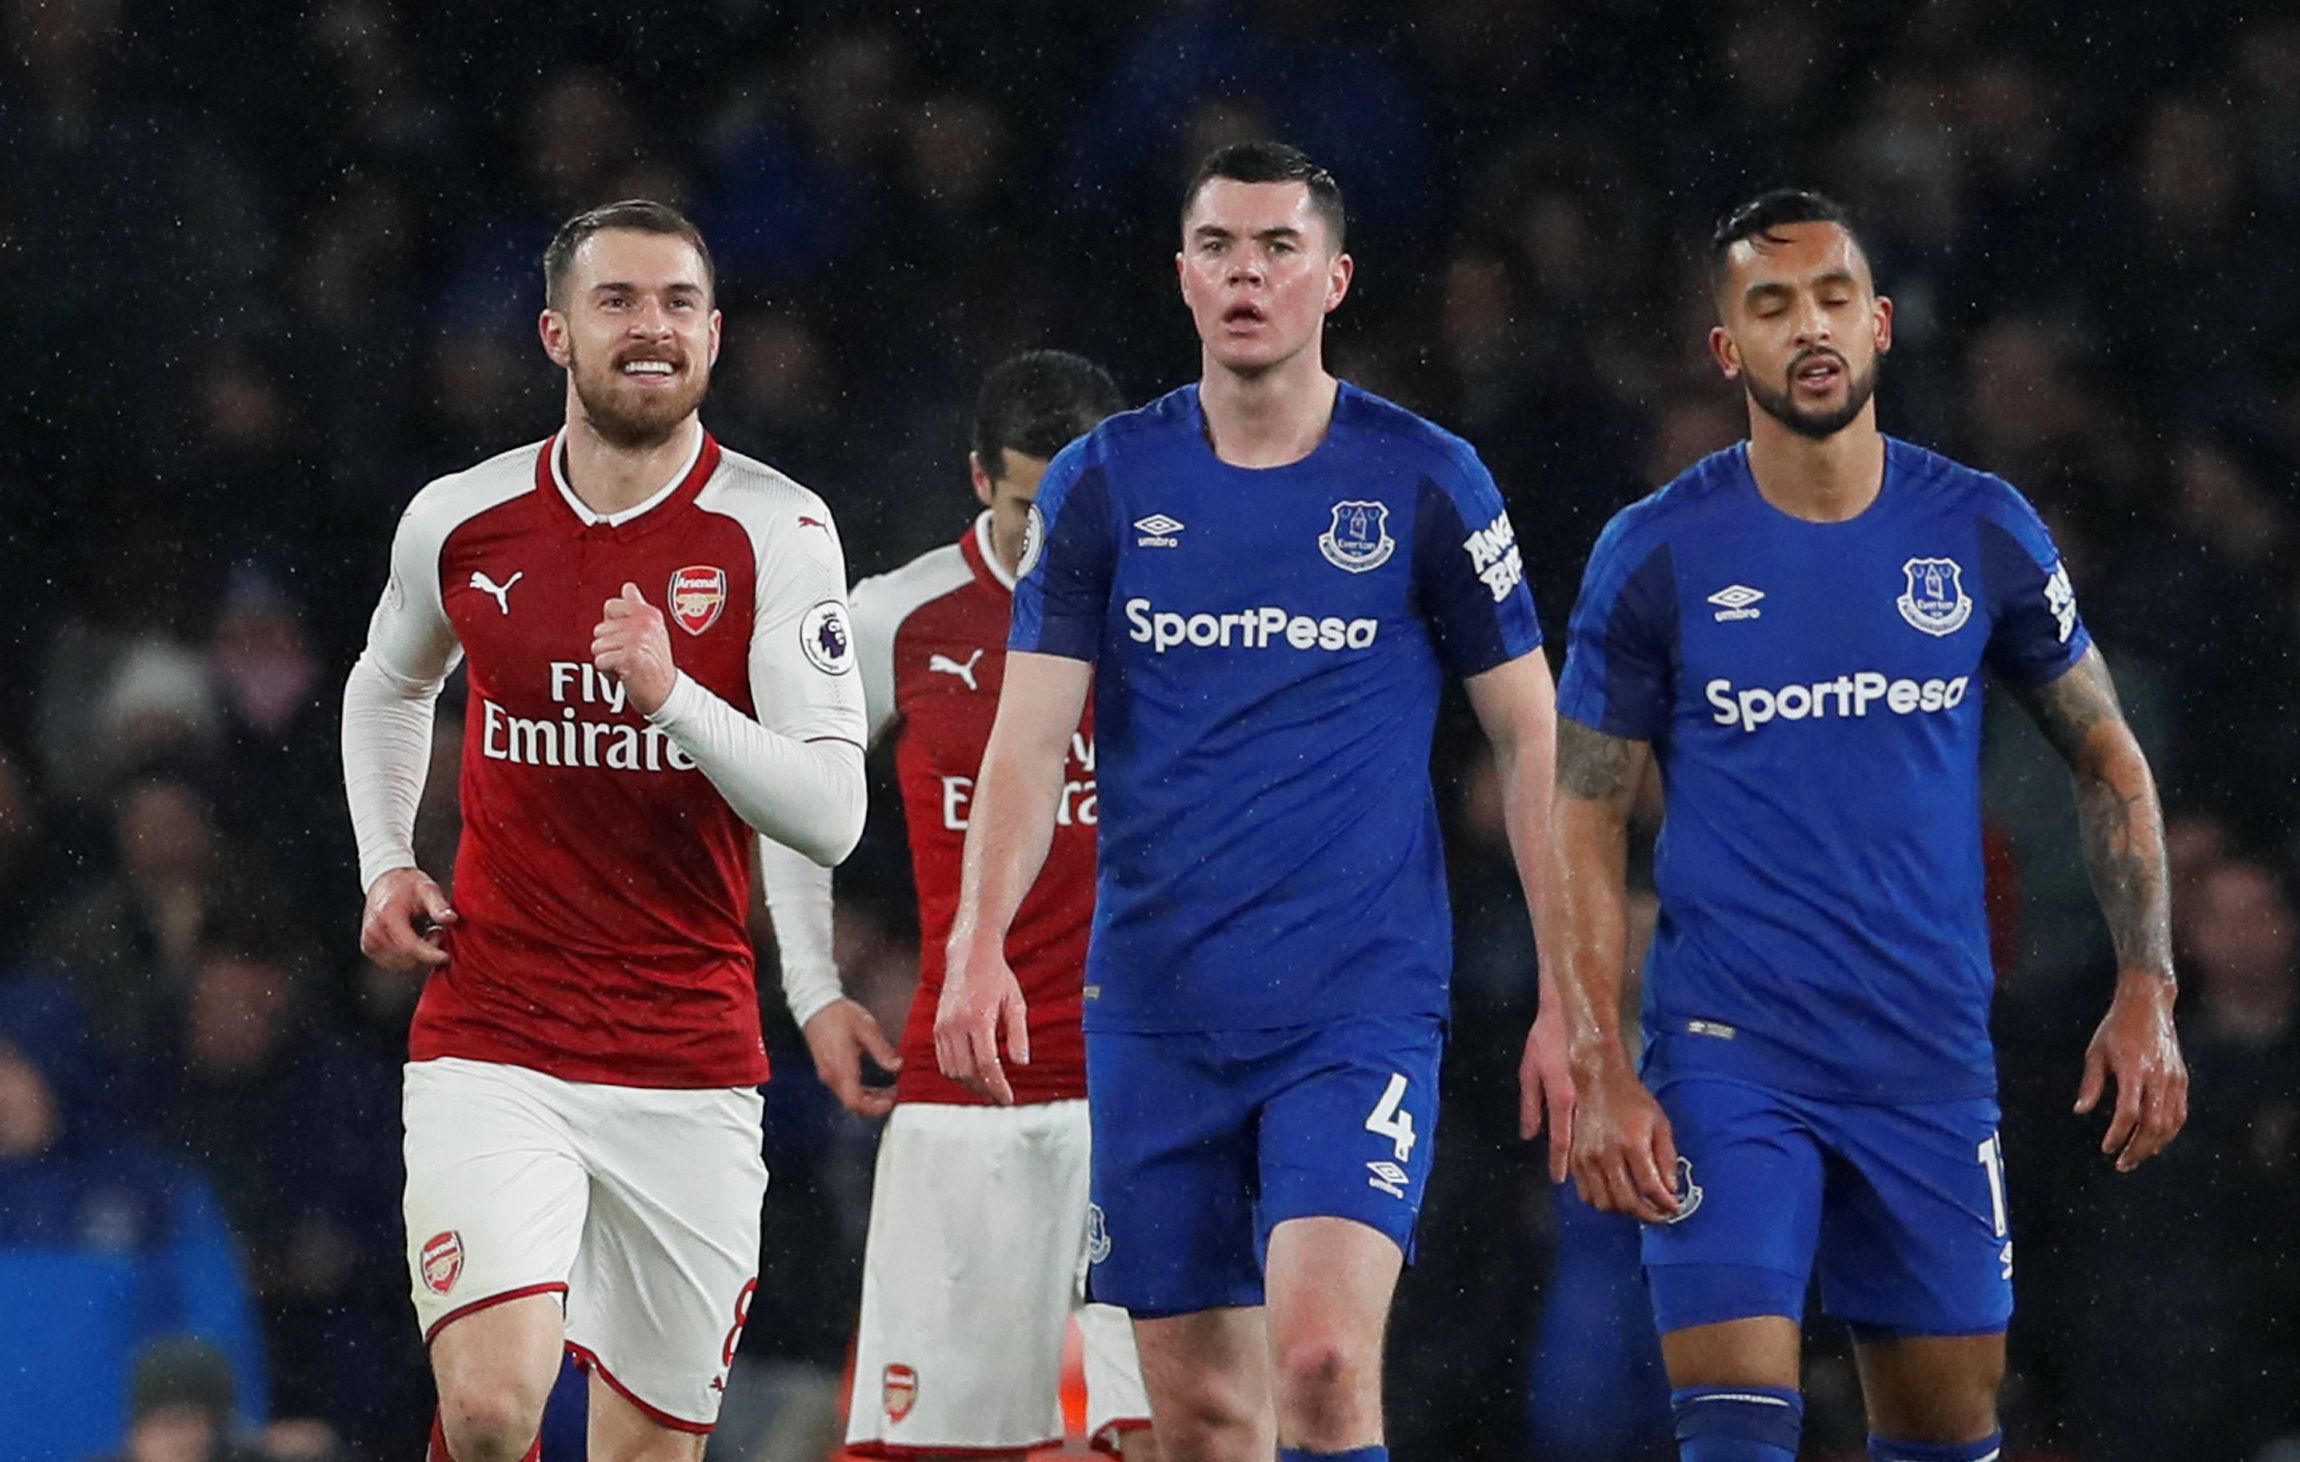 Soccer Football - Premier League - Arsenal vs Everton - Emirates Stadium, London, Britain - February 3, 2018   Arsenal's Aaron Ramsey celebrates scoring their third goal as Everton's Michael Keane and Theo Walcott look dejected    REUTERS/David Klein    EDITORIAL USE ONLY. No use with unauthorized audio, video, data, fixture lists, club/league logos or 